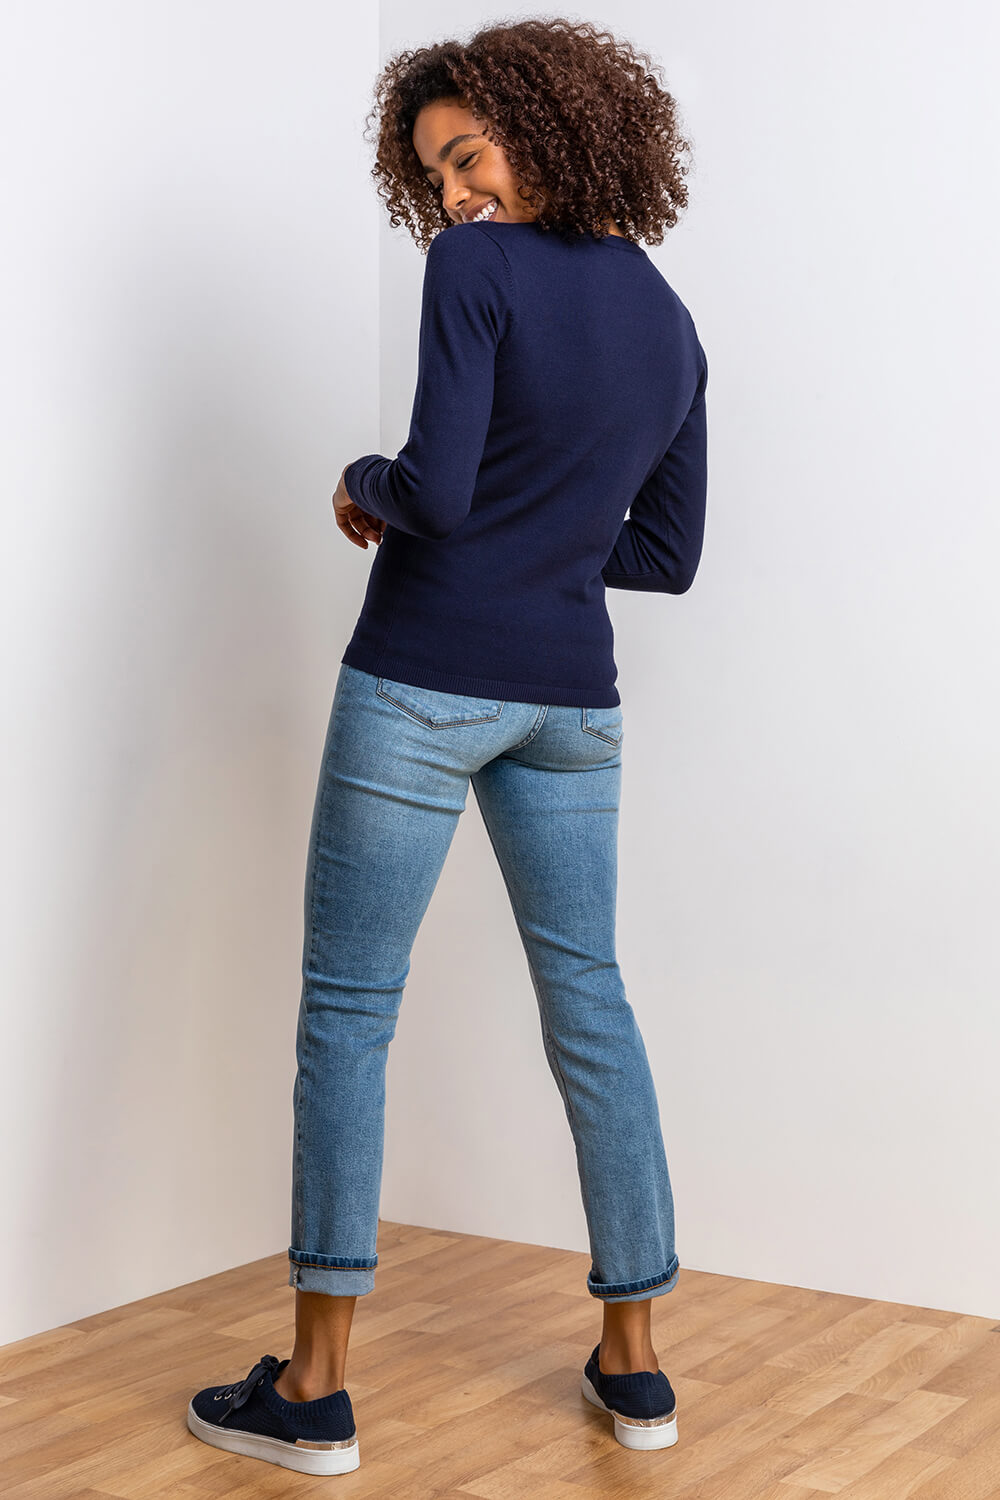 Navy  Floral Embroidered Crew Neck Jumper, Image 2 of 4